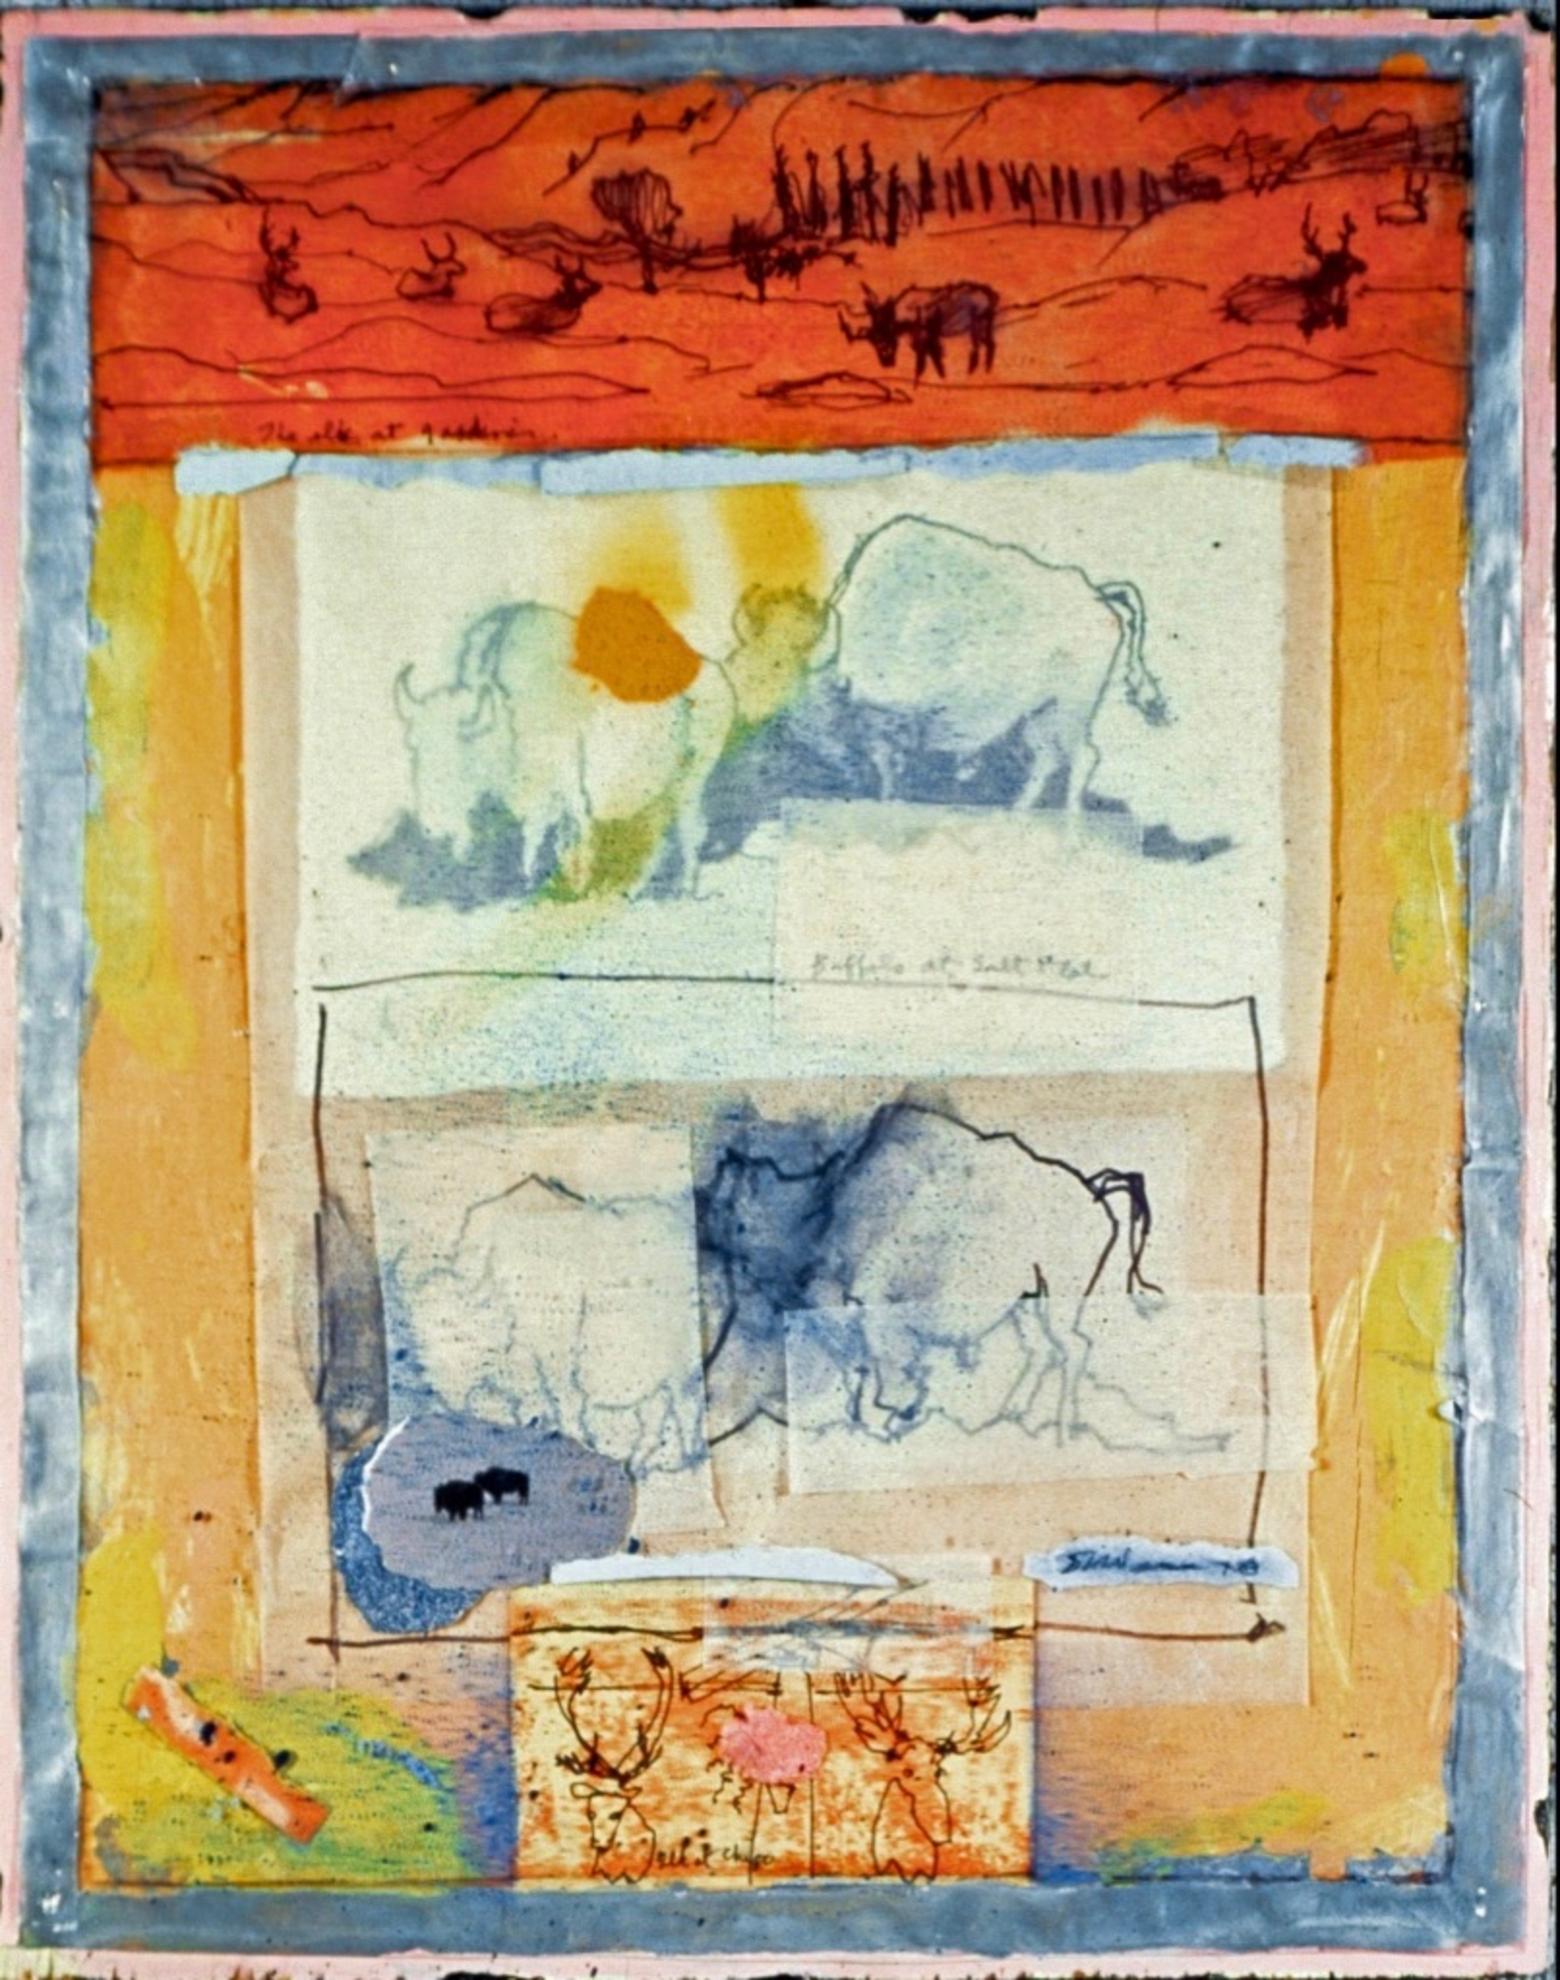 "Western Painting" (1976) by Robert DeWeese. Image courtesy of the DeWeese family